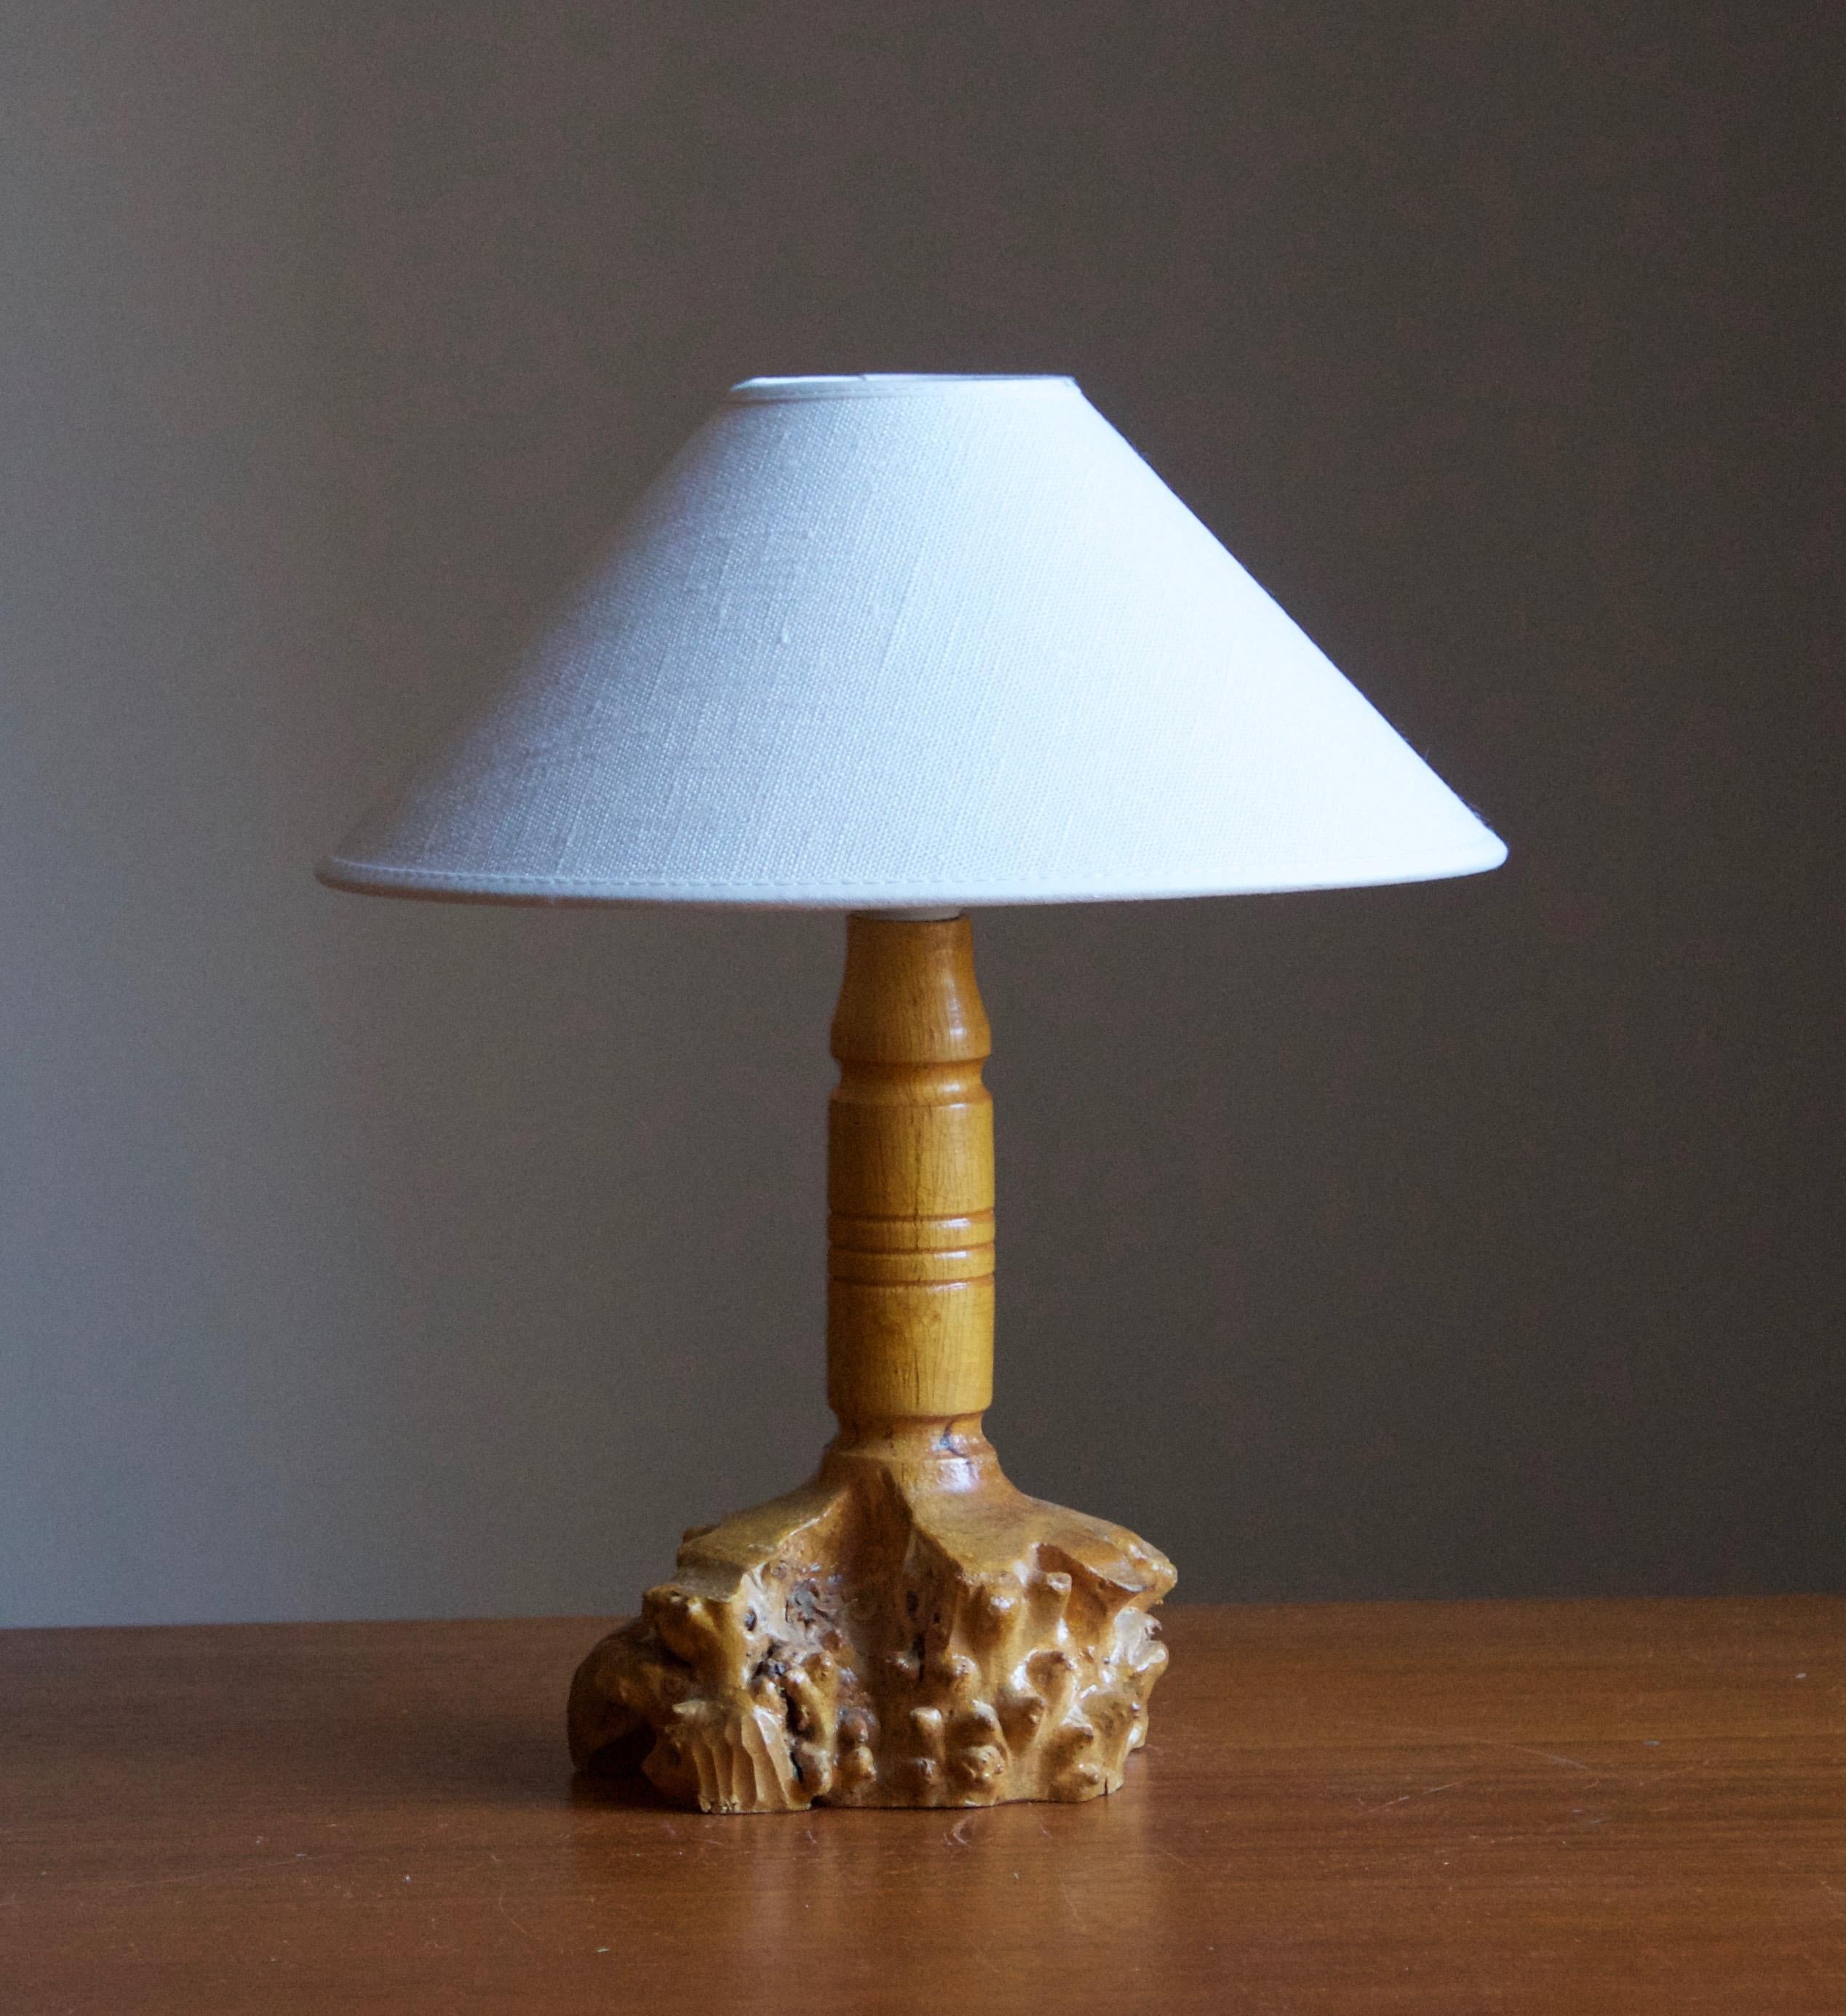 A table lamp designed and produced in Sweden. c. 1950s-1960s.

Stated dimensions exclude lampshade, height includes the socket. Sold without lampshade.

Takes one lightbulb on E27 base. No stated max wattage.